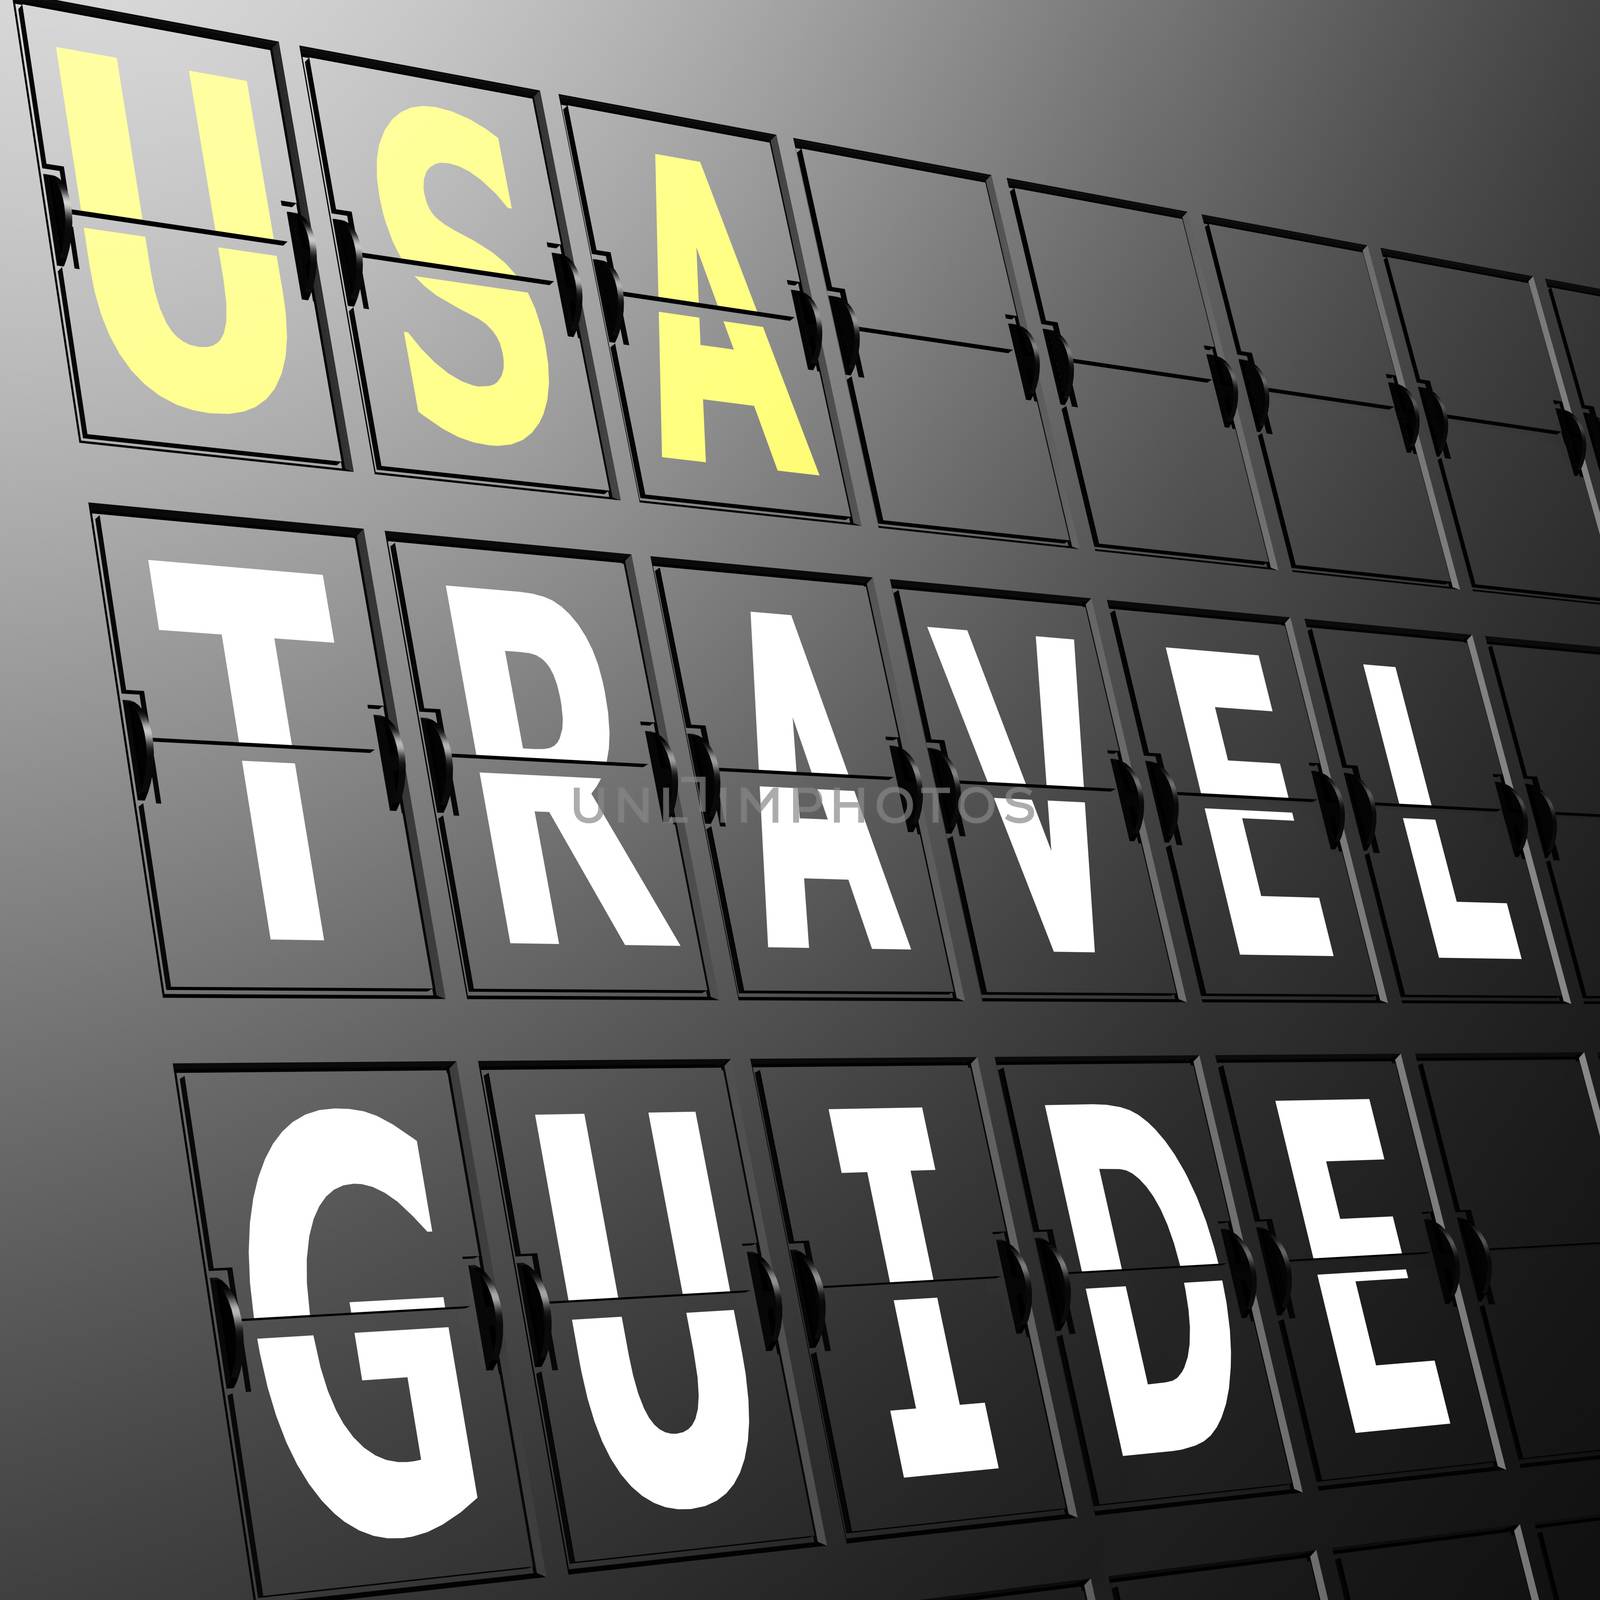 Airport display USA travel guide by tang90246